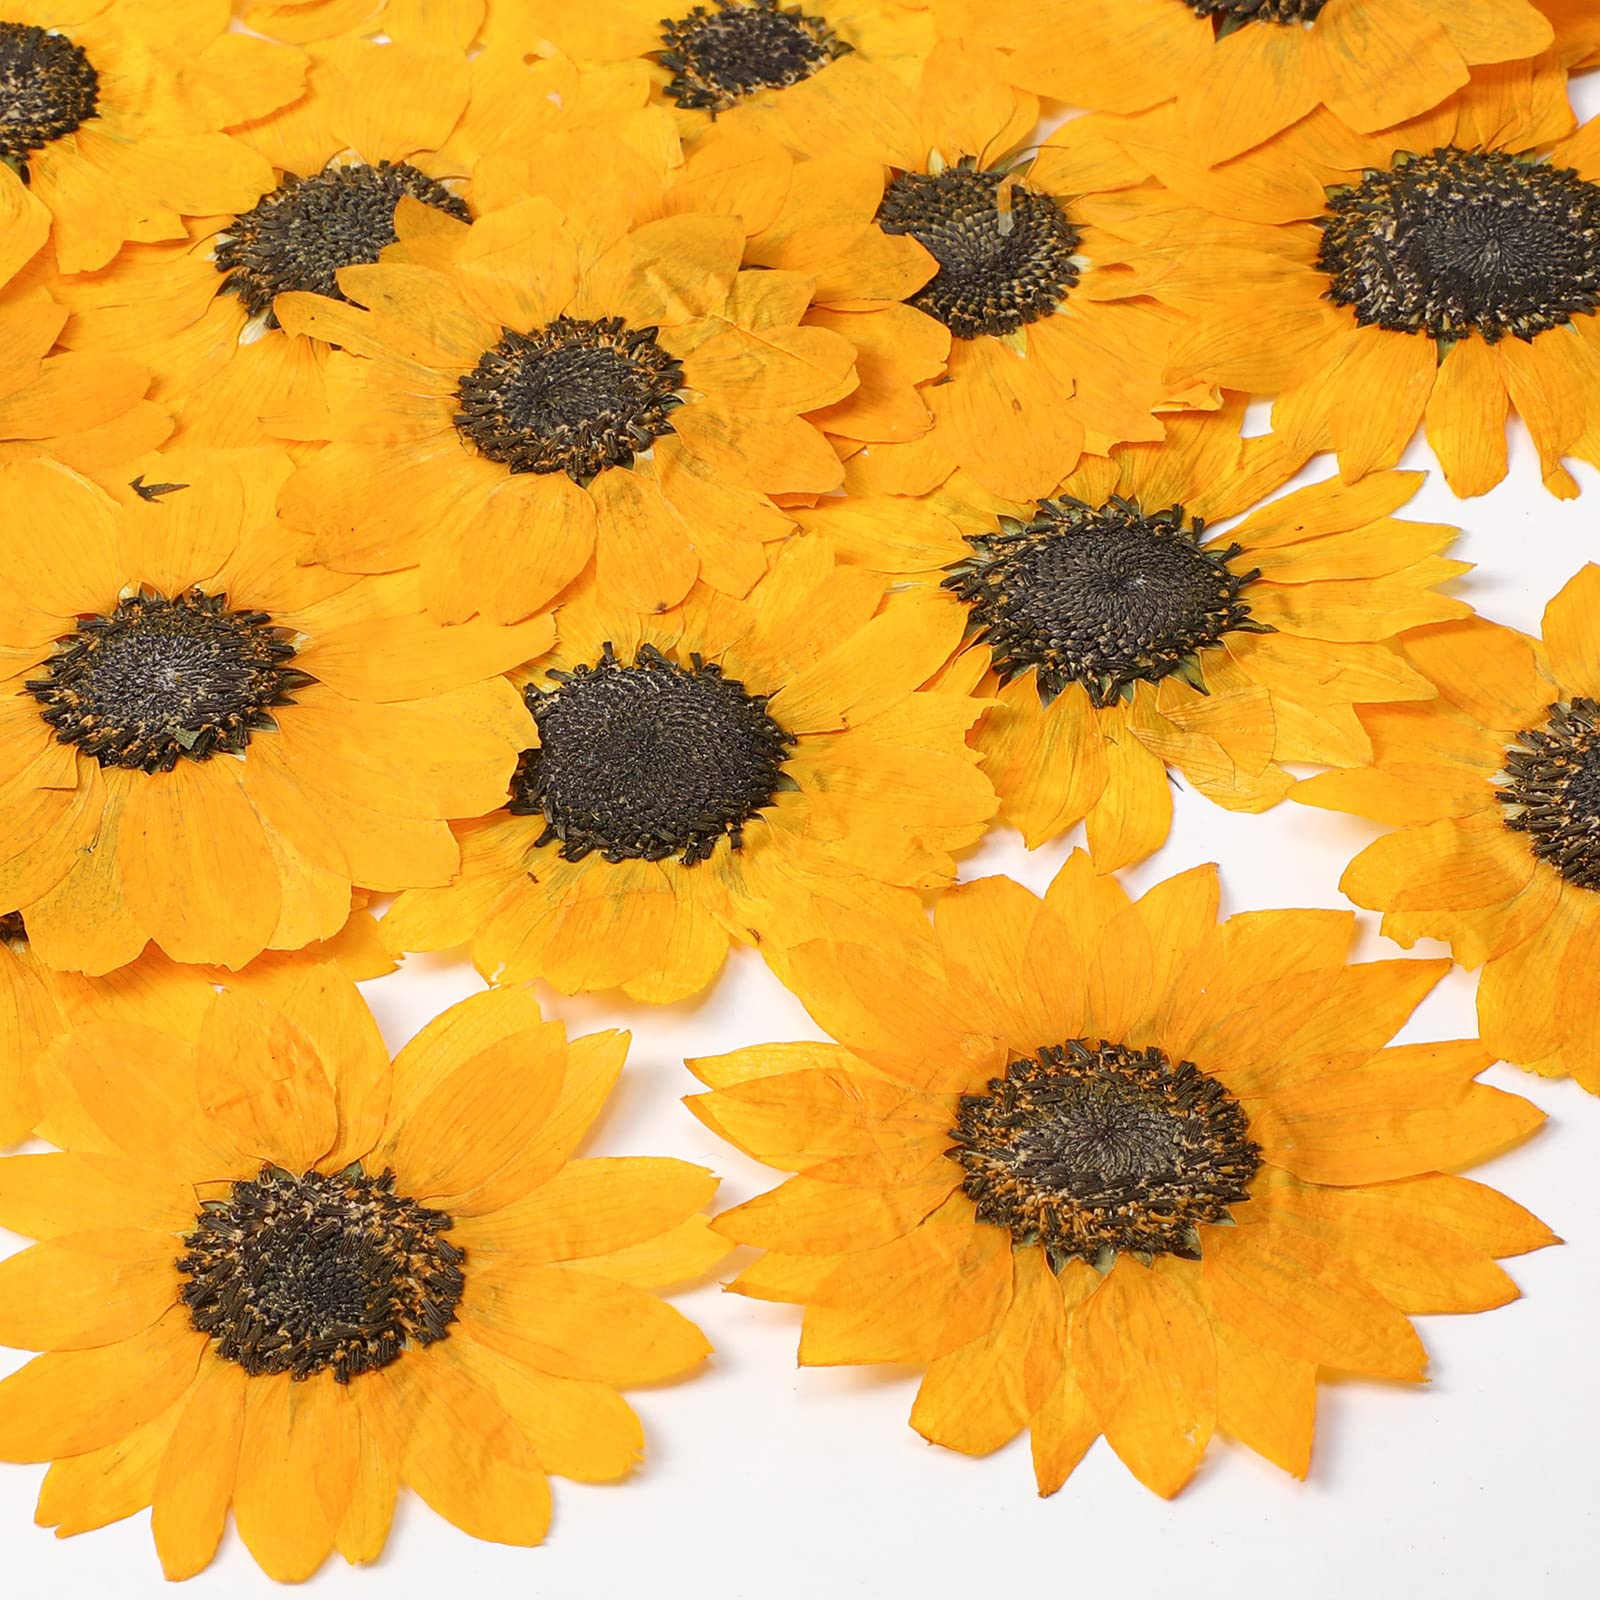 48 Pcs Pressed Flowers for Crafts Dried Pressed Sunflowers for